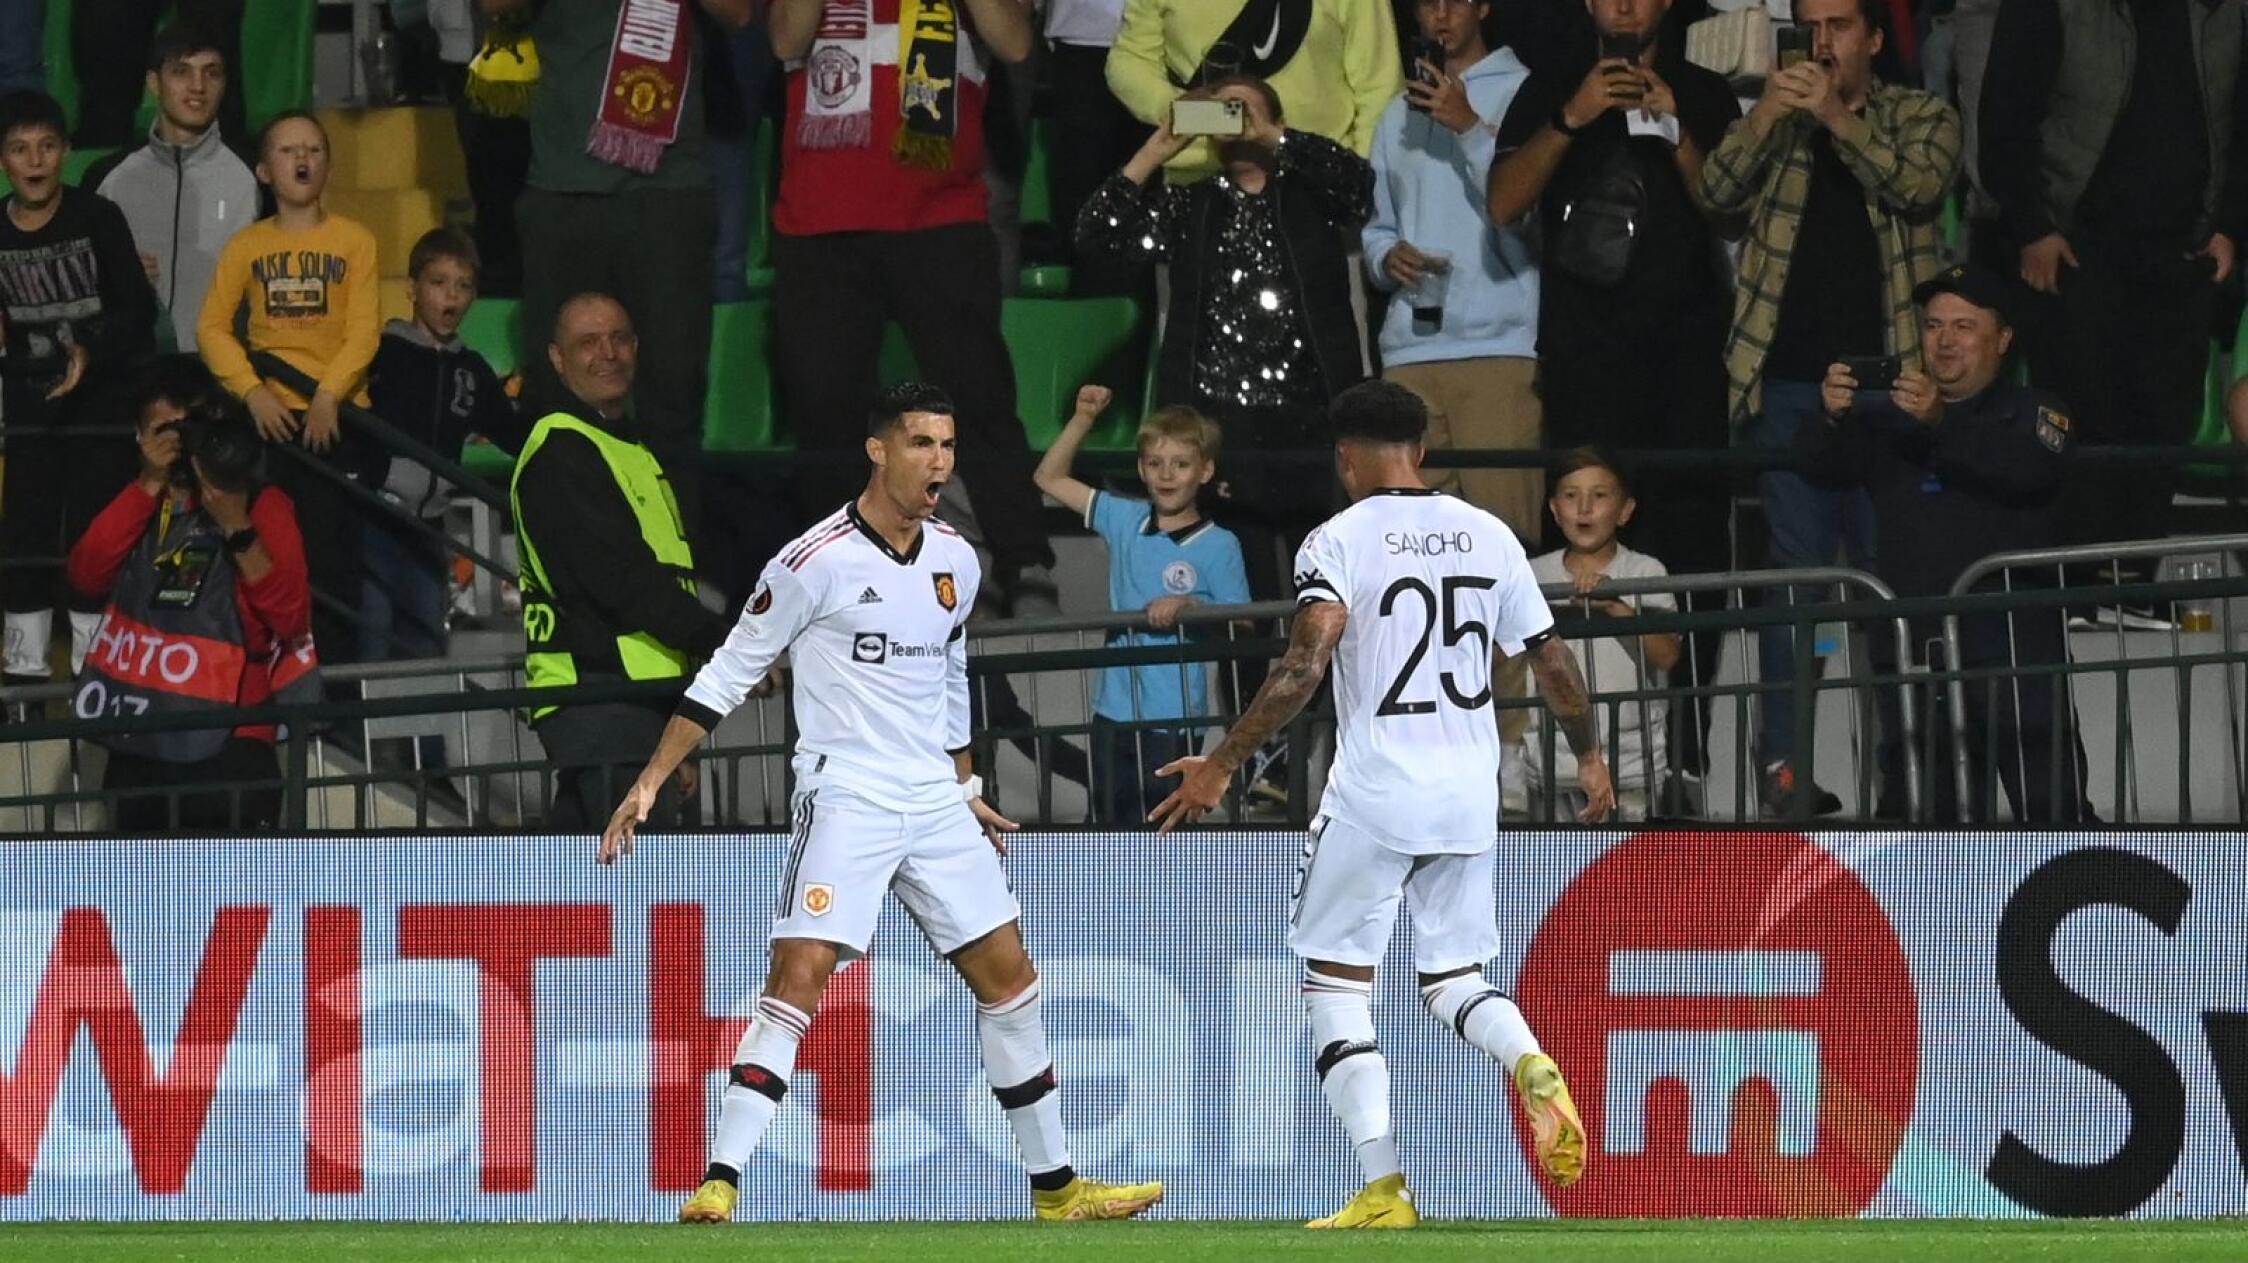 Manchester United's Portuguese striker Cristiano Ronaldo celebrates with Jadon Sancho after scoring the second goal goal during their UEFA Europa League group E football match against Sheriff at Zimbru stadium in Chisinau on Thursday